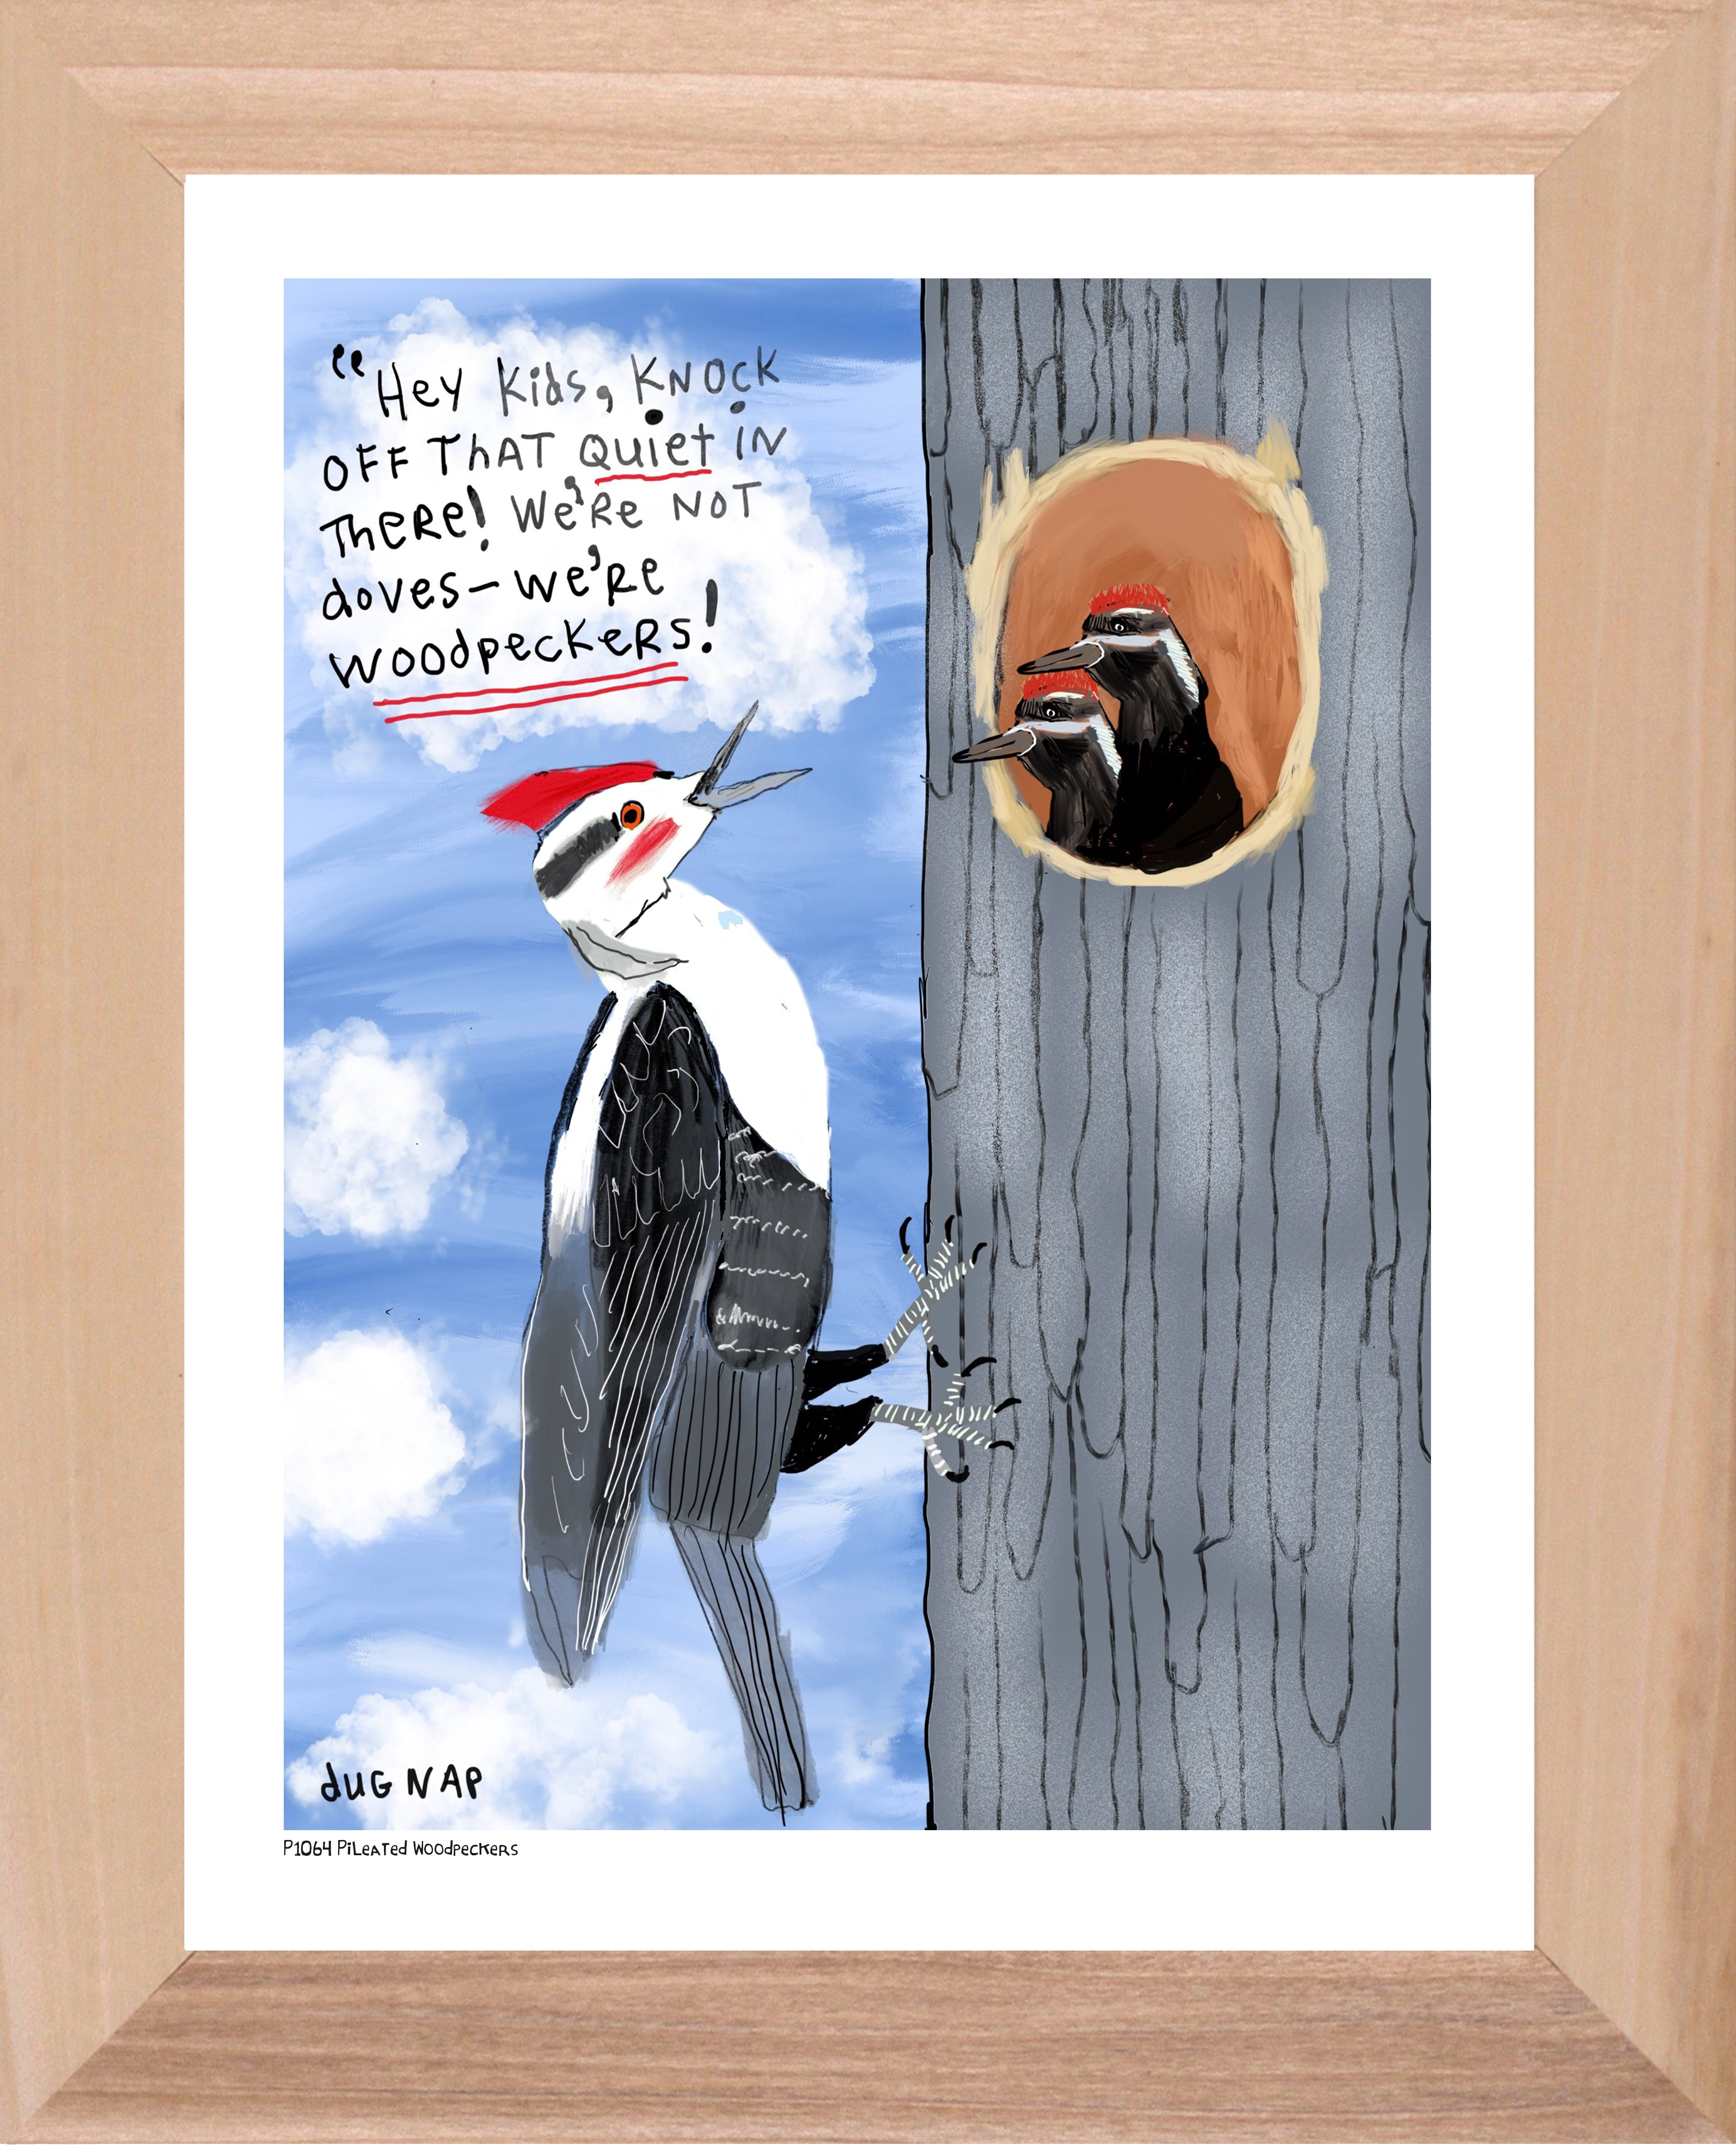 P1064 - Pileated Woodpeckers